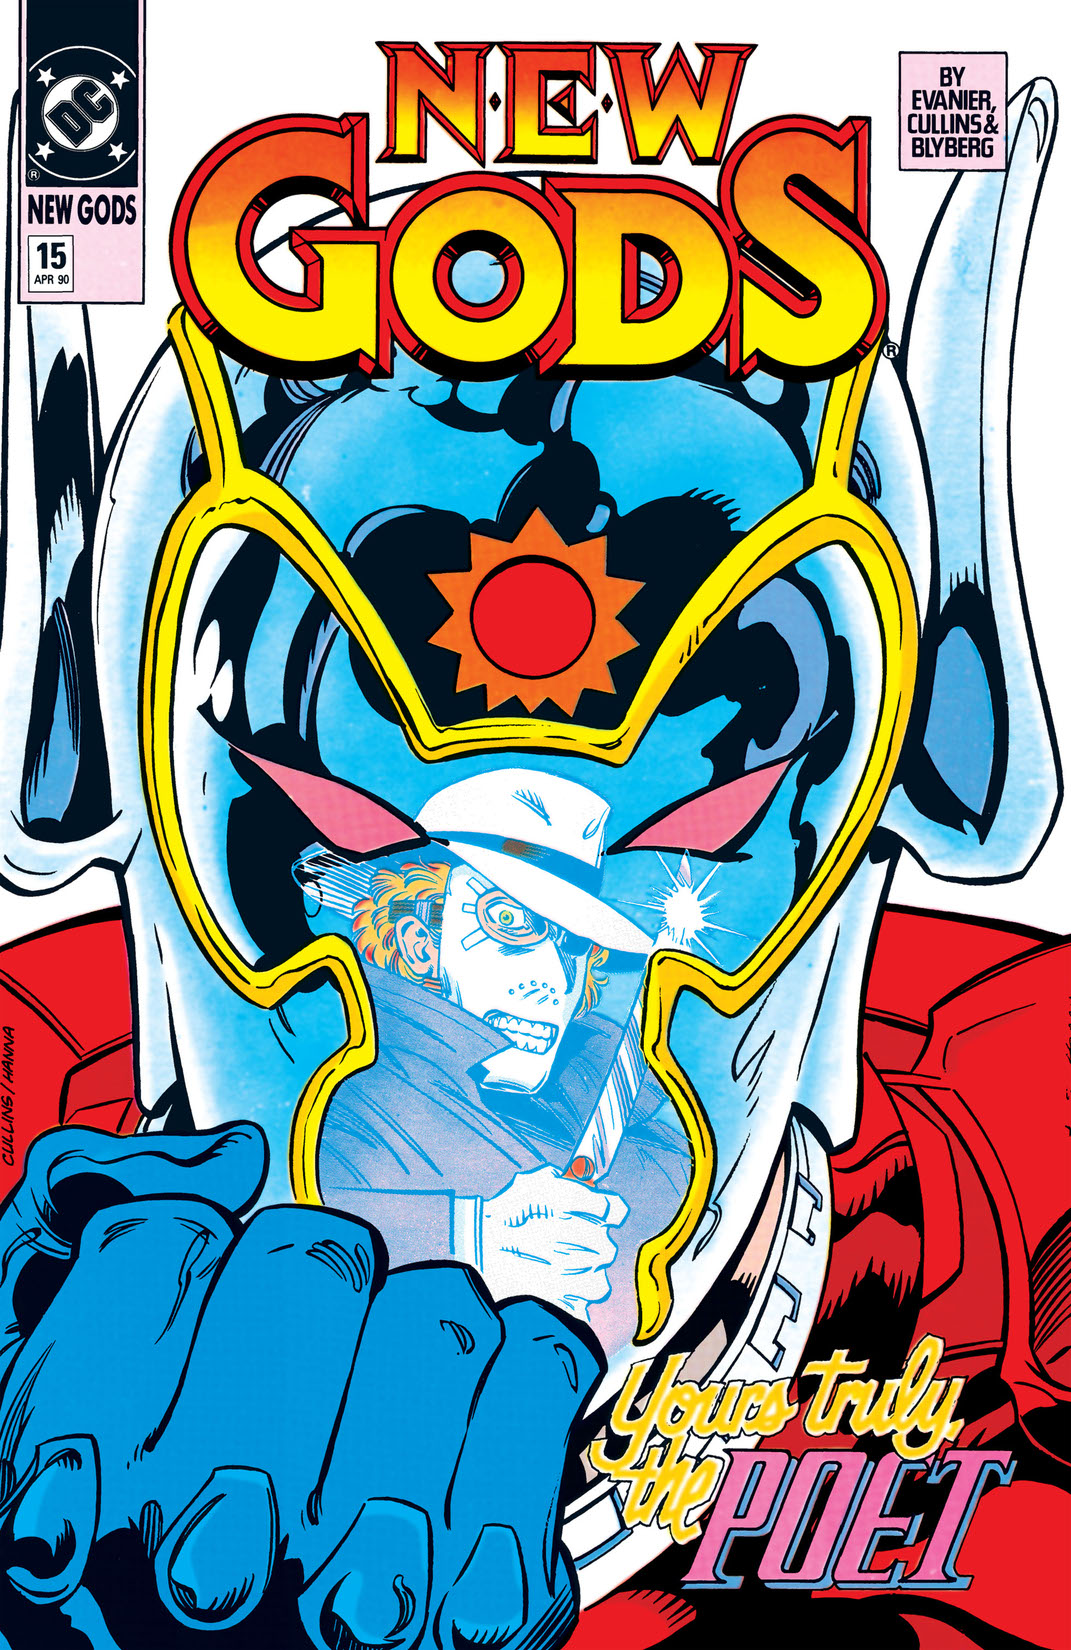 New Gods (1989-) #15 preview images